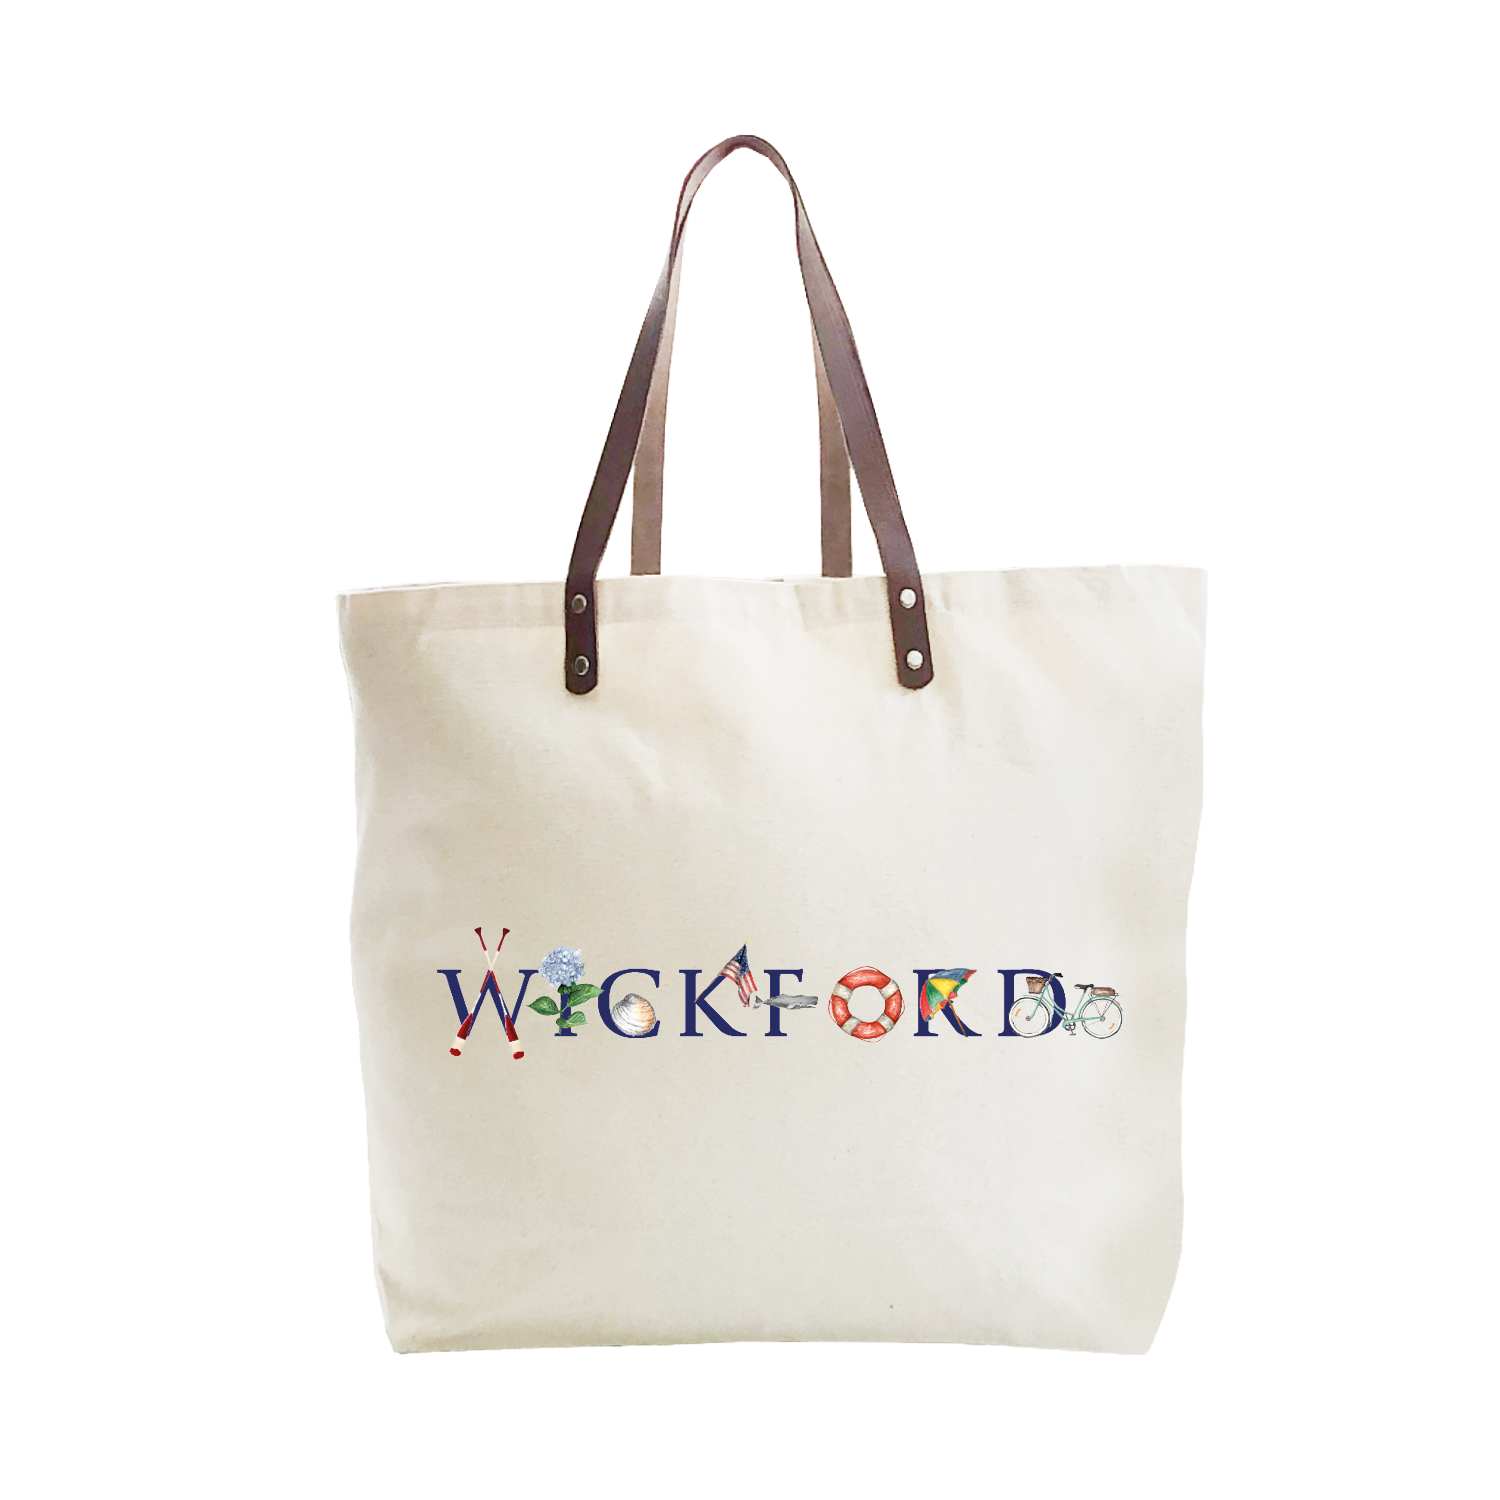 wickford large tote